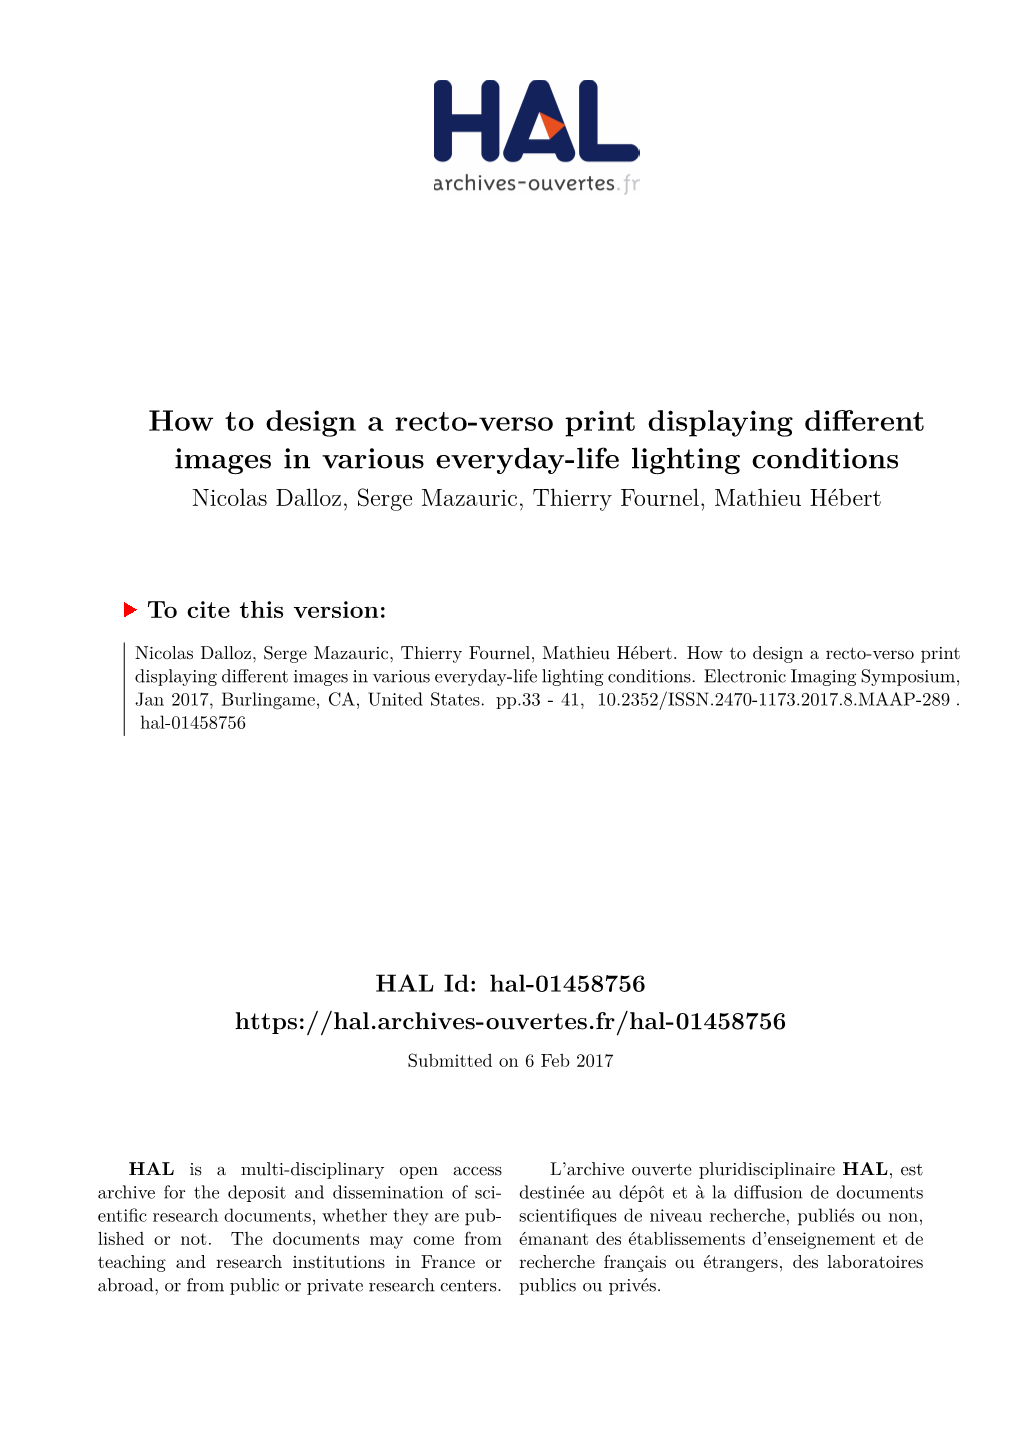 How to Design a Recto-Verso Print Displaying Different Images In